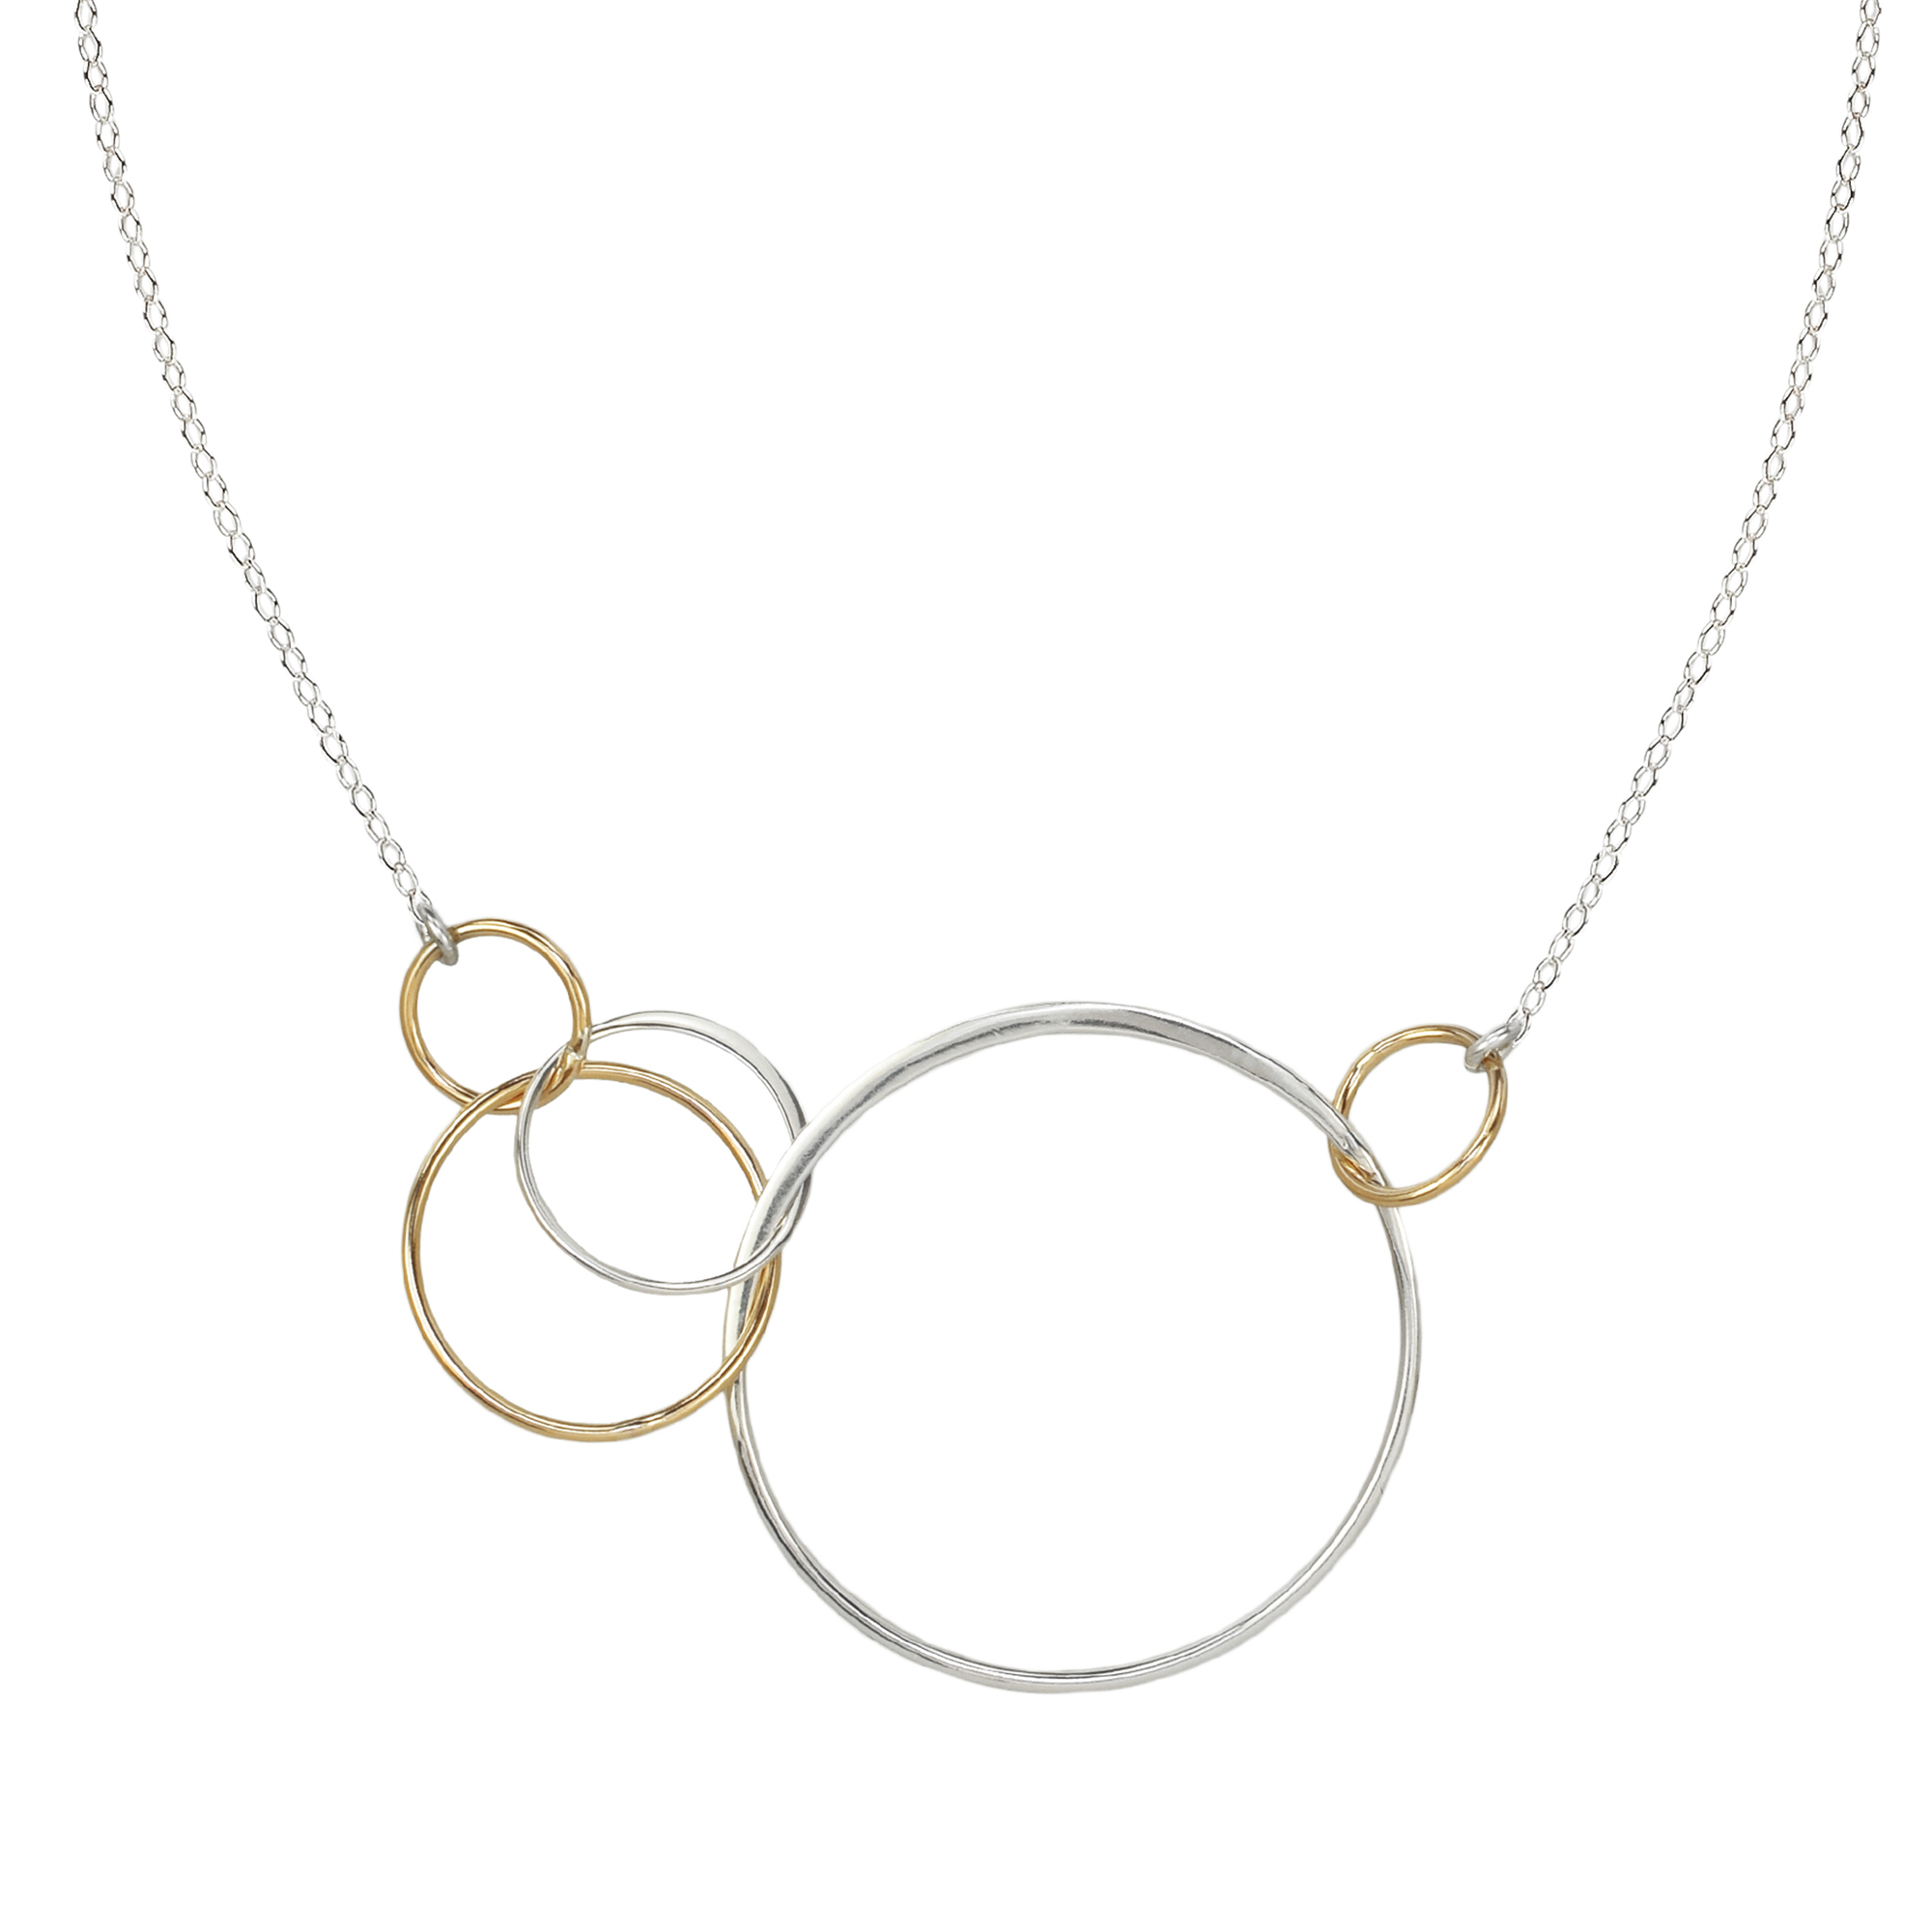 Silver & Gold Five Circle Necklace - All The Falling Stars